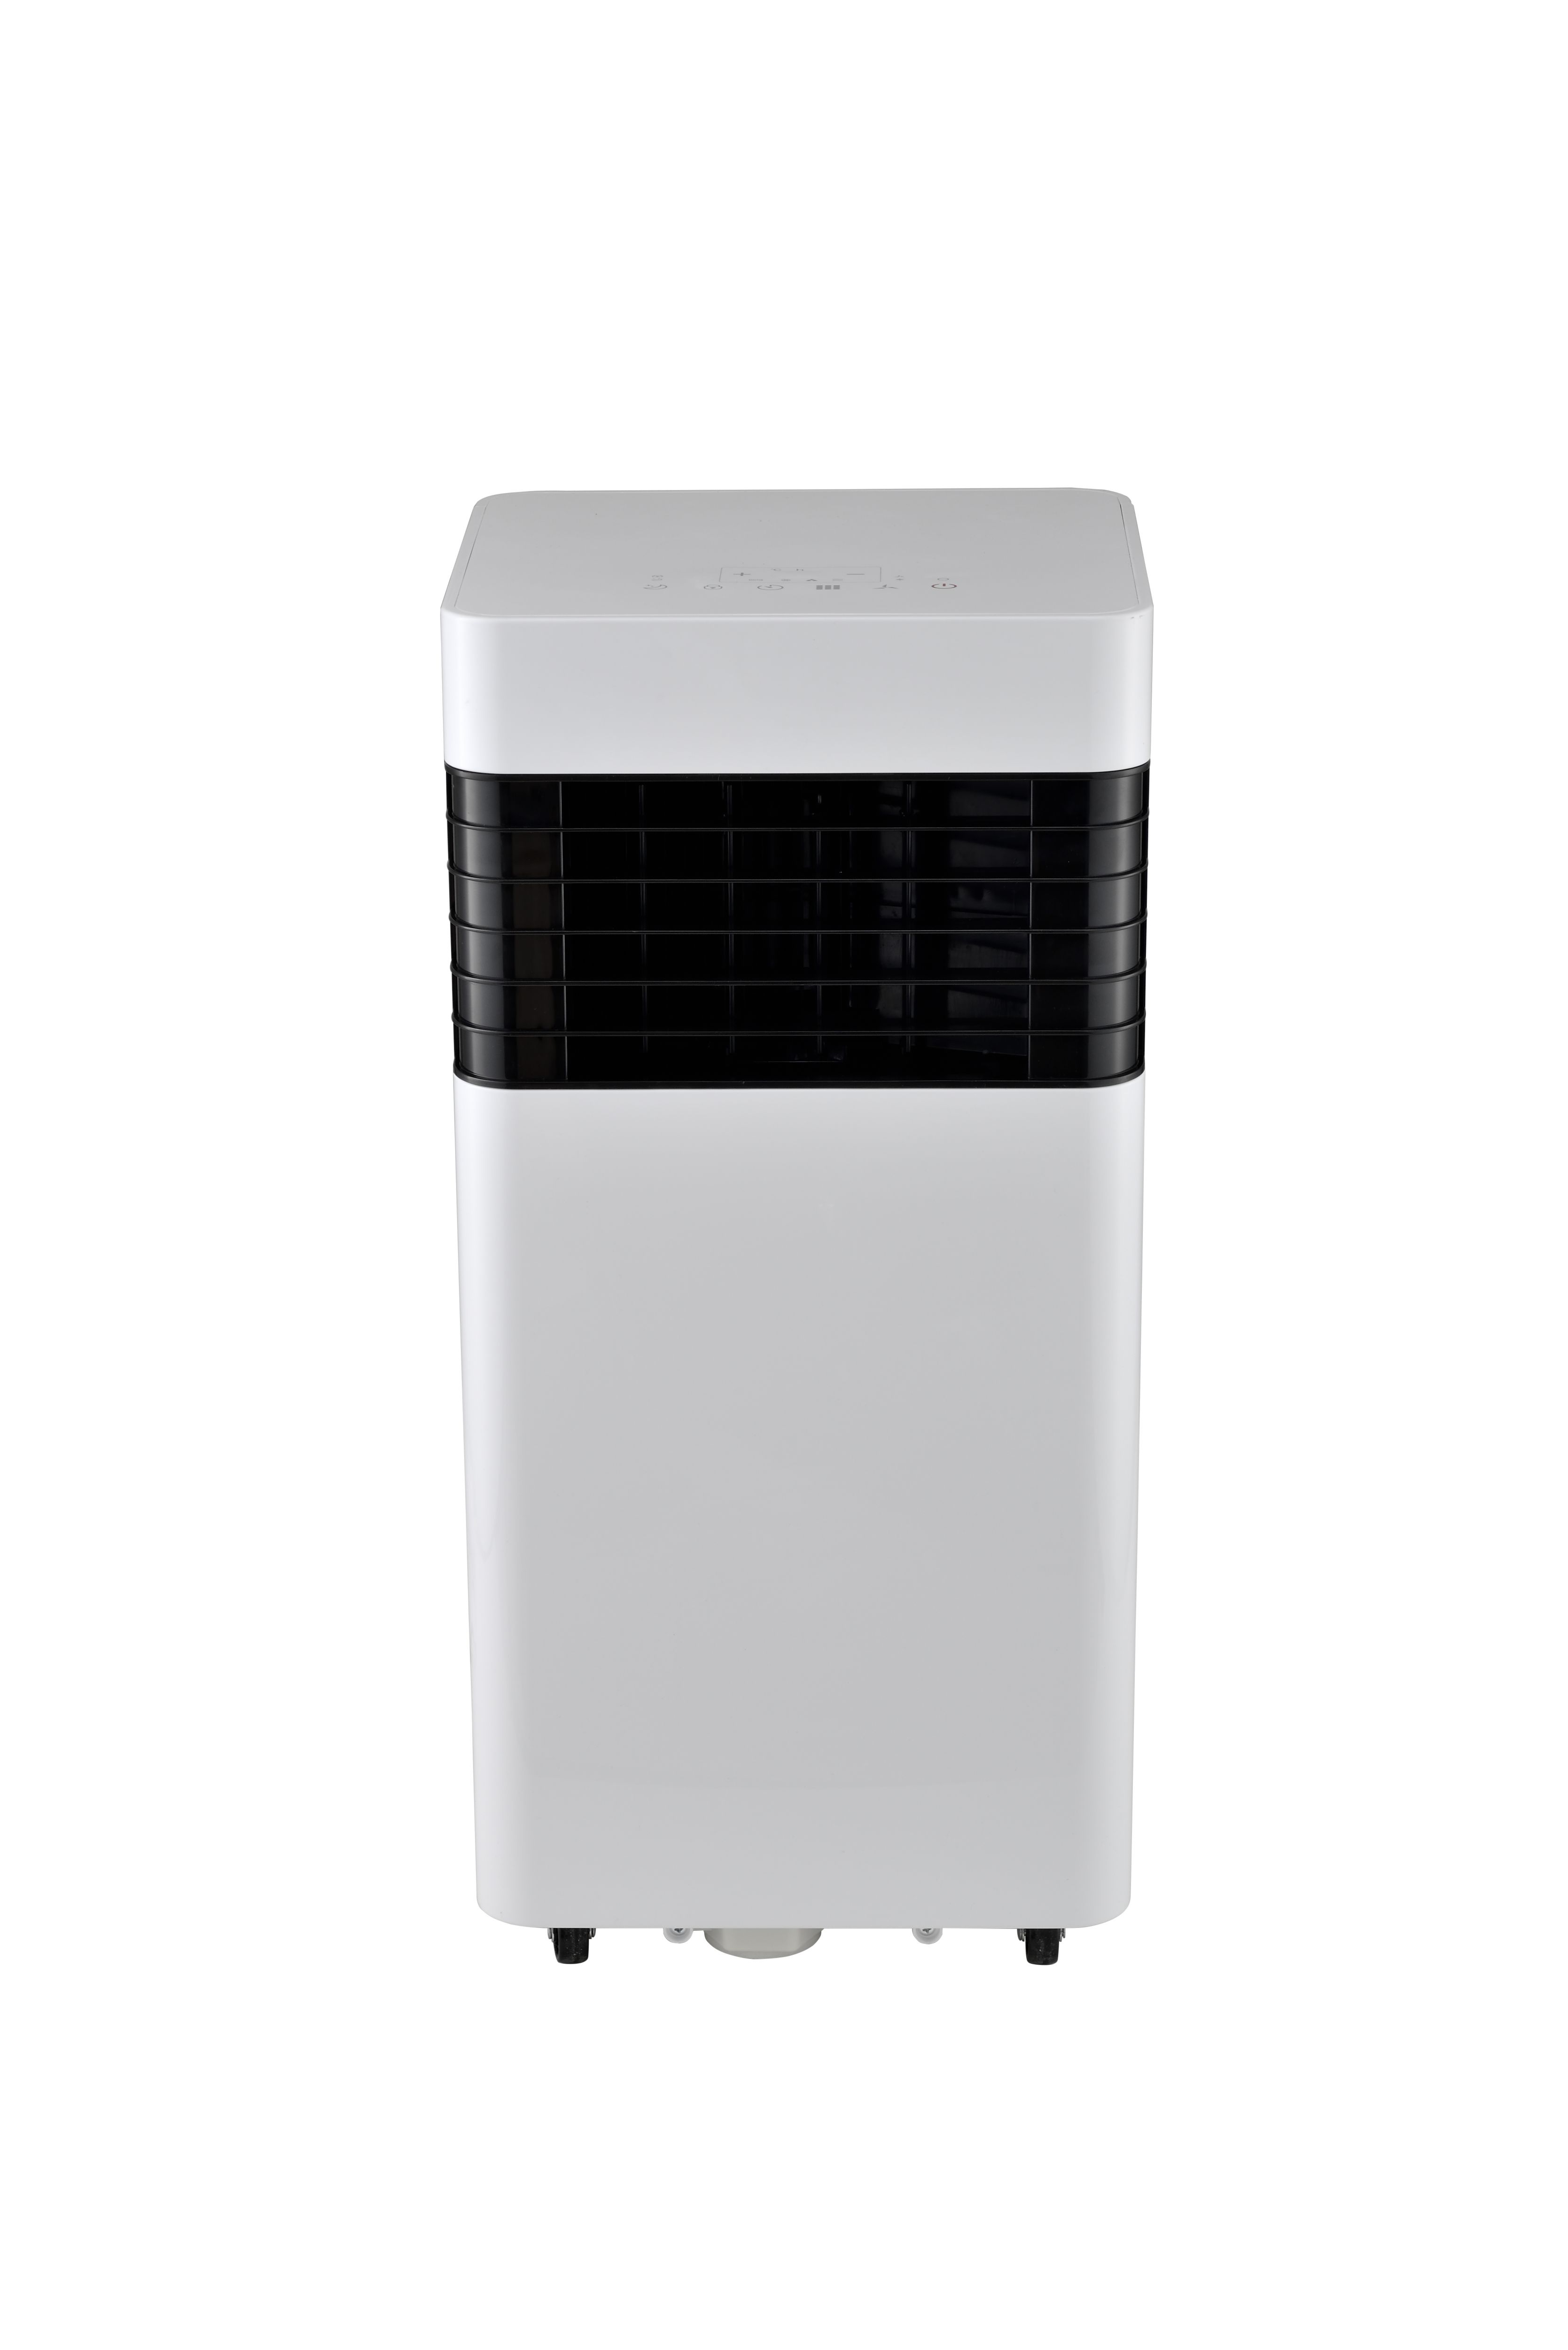 GoodHome Mobile 3 in 1 Local air conditioner 220-240V 5000BTU